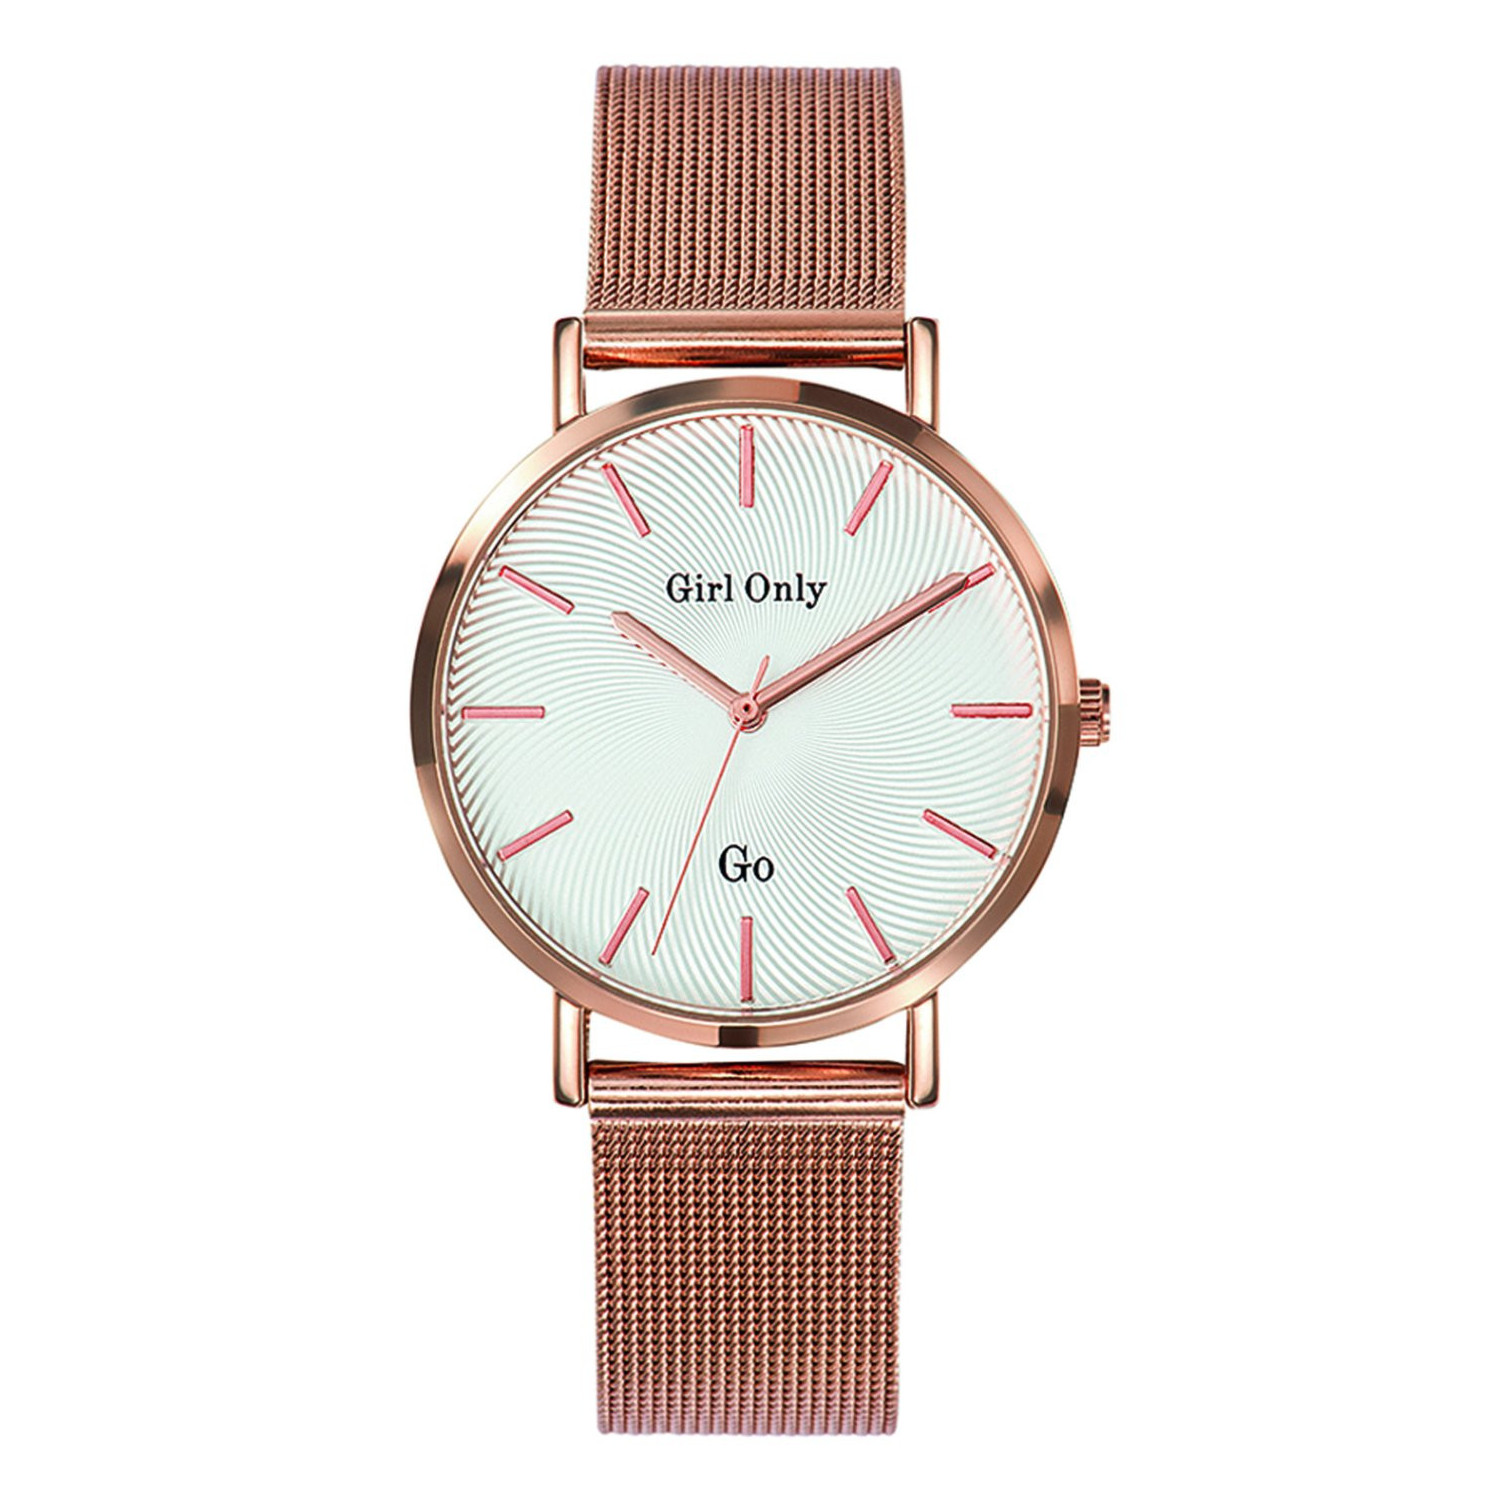 Montre femme Go Girl Only blanche